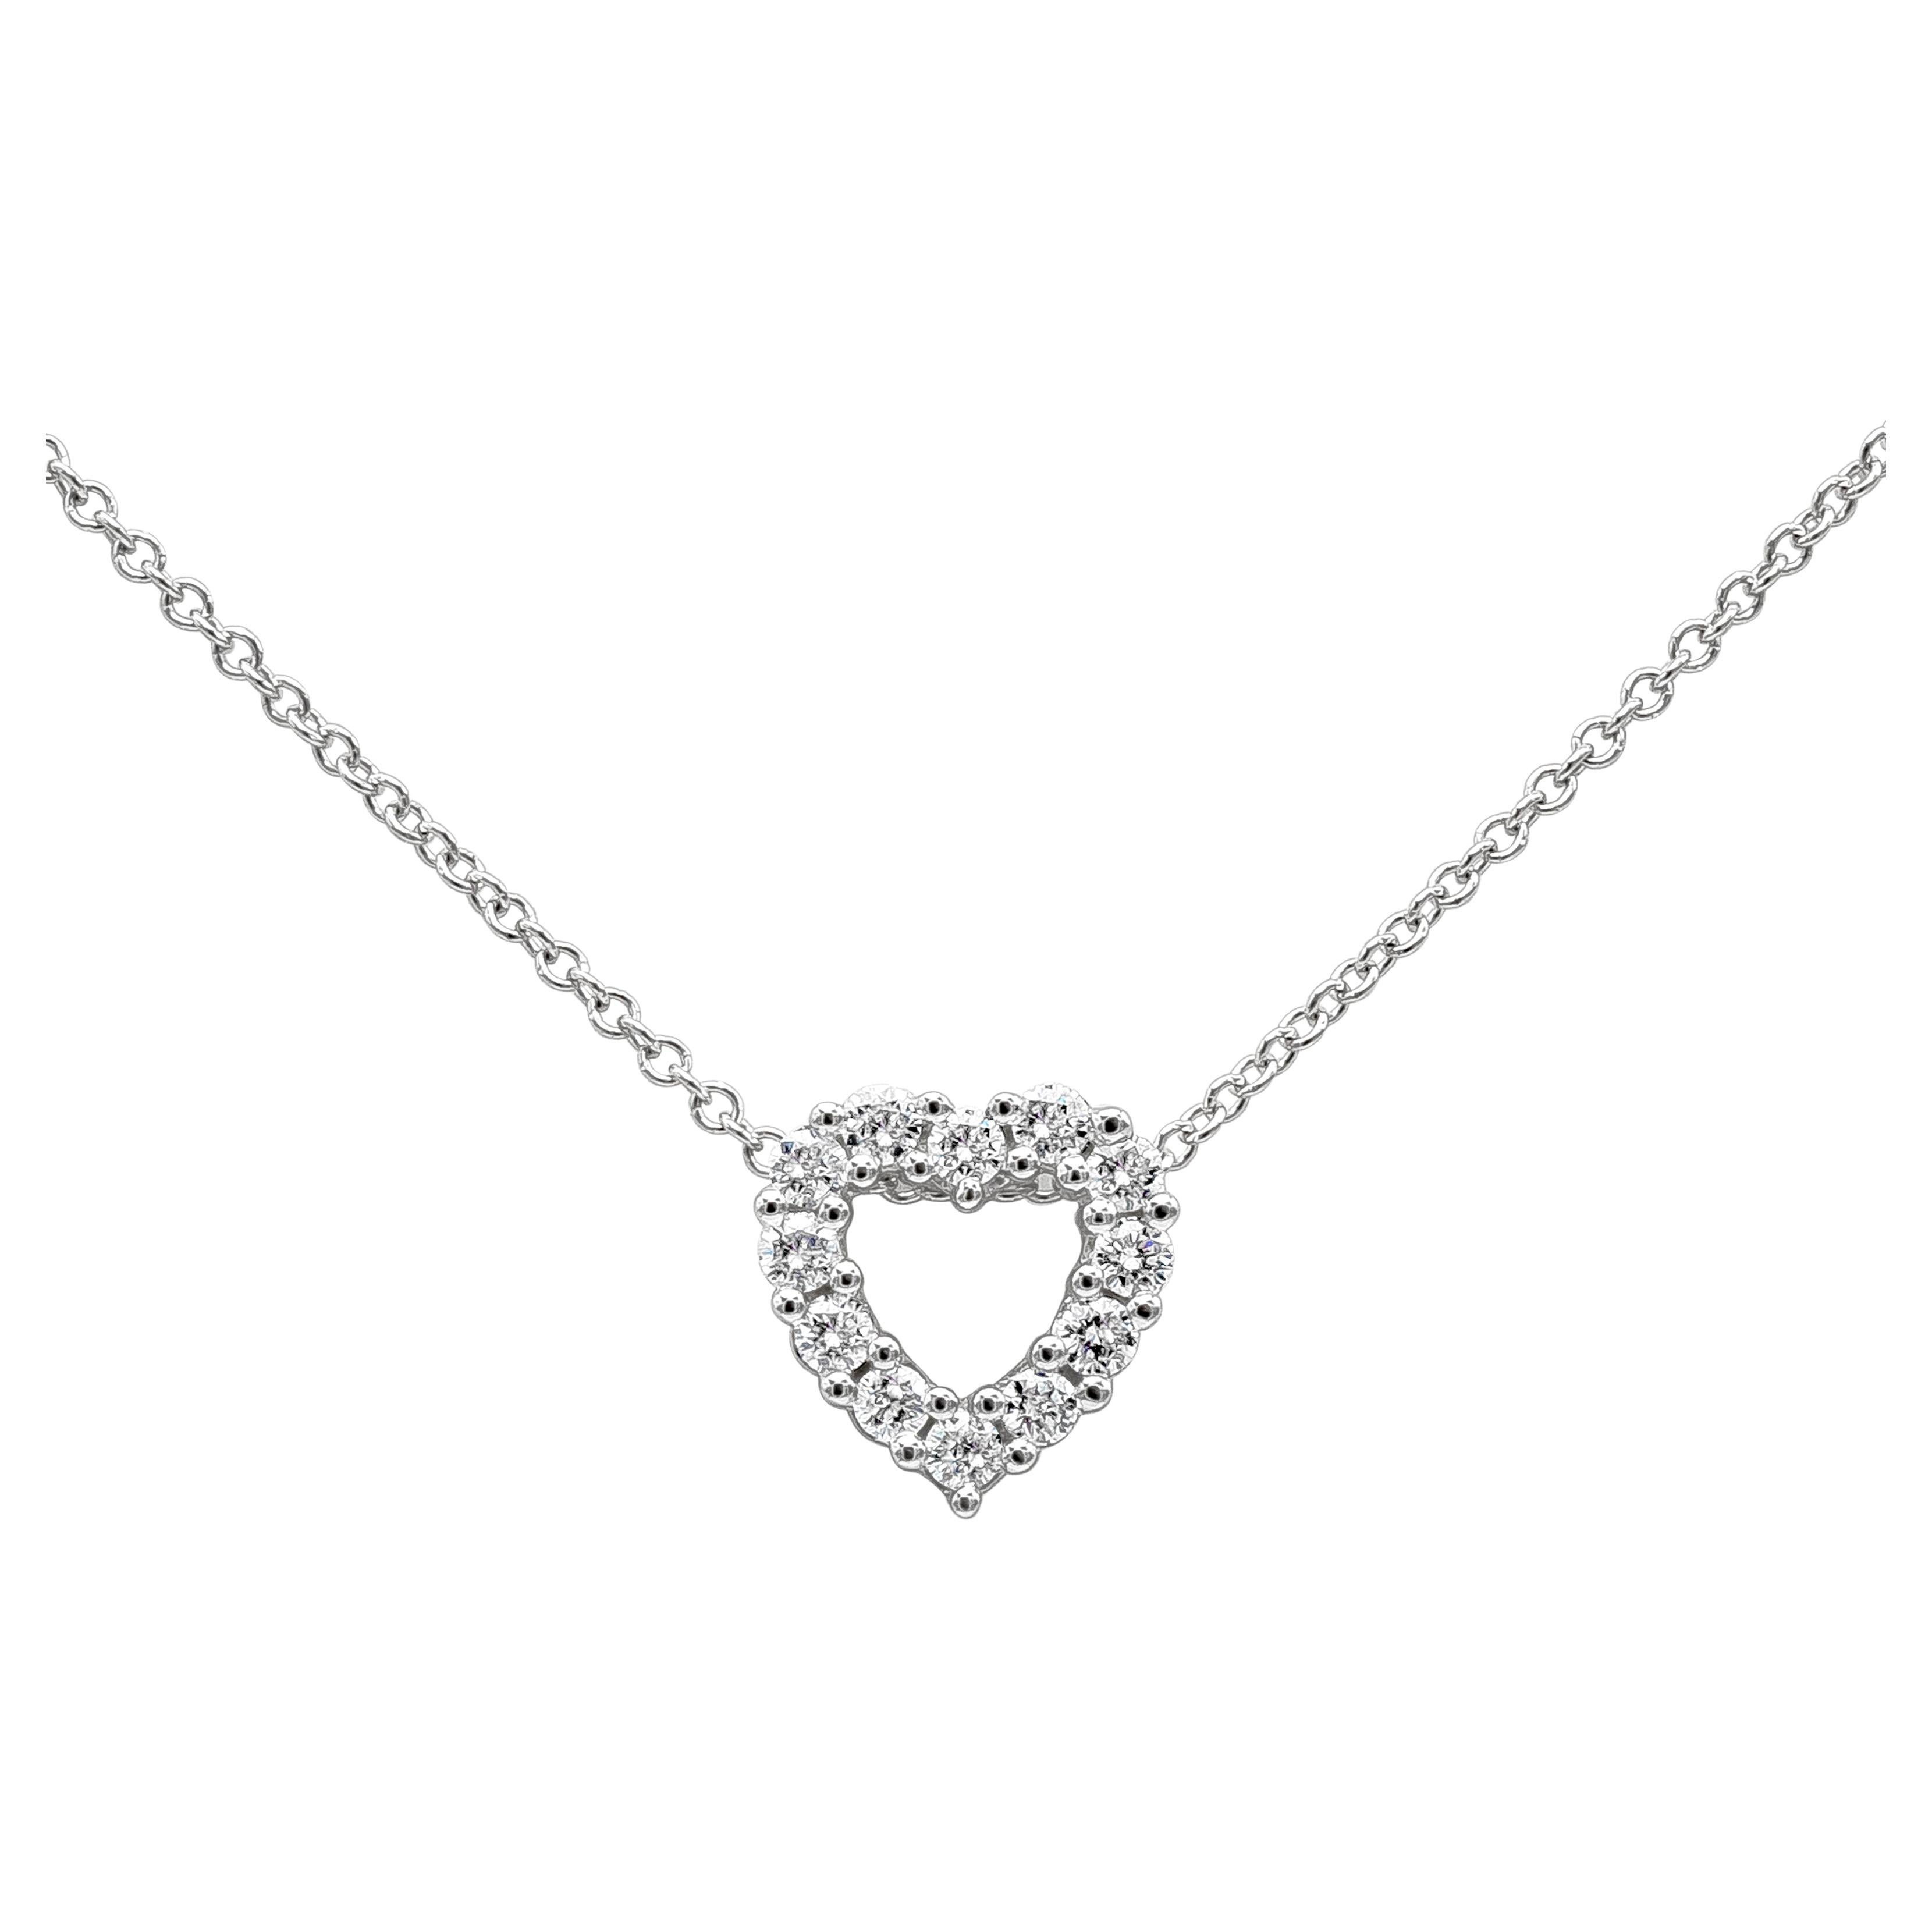 Roman Malakov 0.35 Carats Total Round Diamond Open-Work Heart Pedant Necklace For Sale